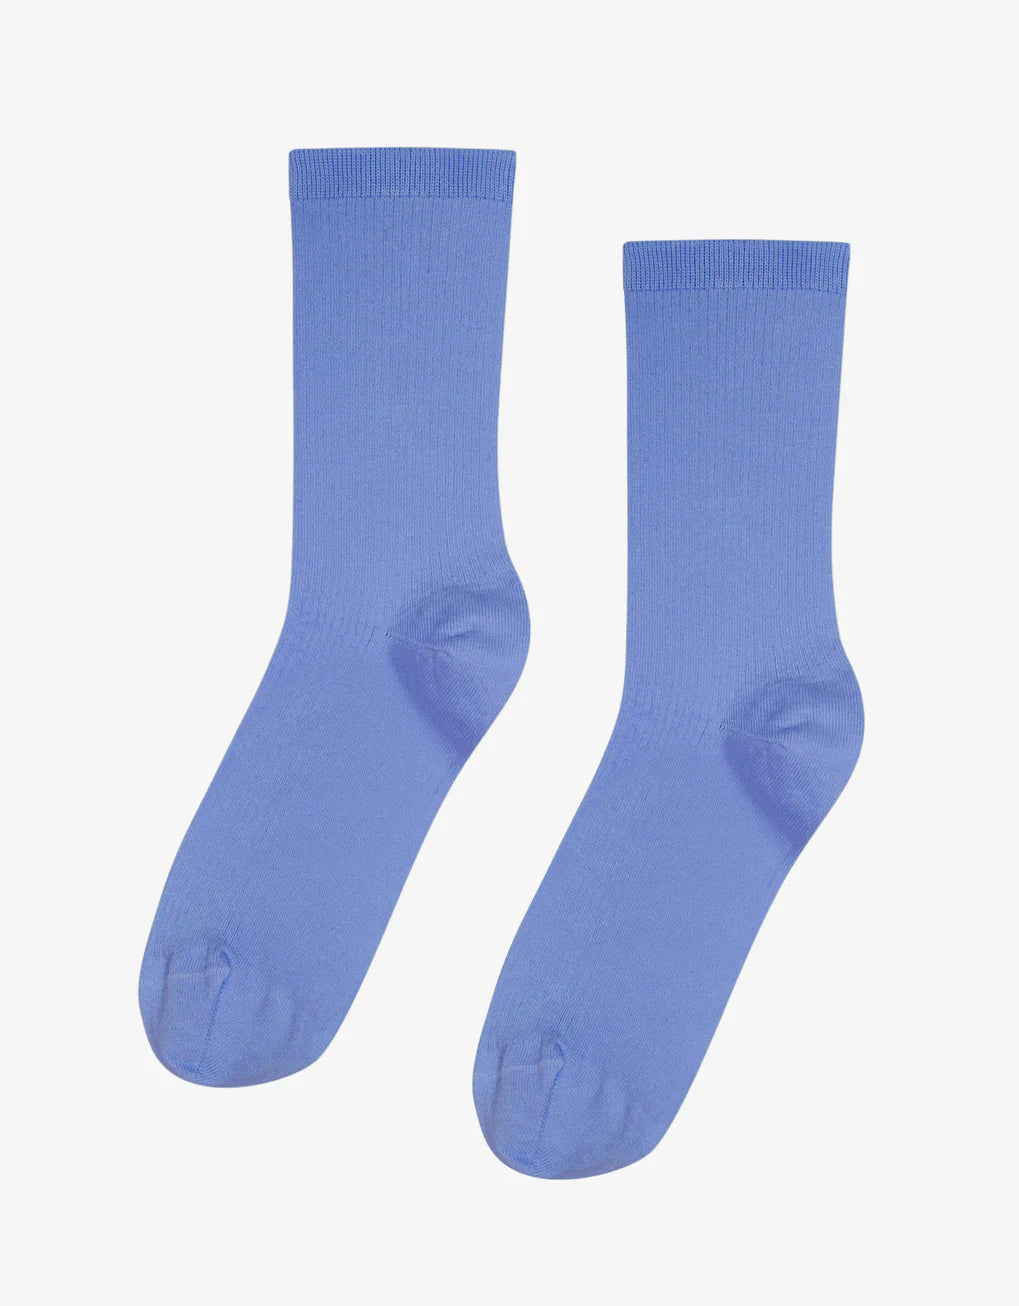 A pair of Colorful Standard Classic Organic Socks in a vibrant blue color, set against a clean white background. These breathable and seamless socks offer optimal comfort and style.